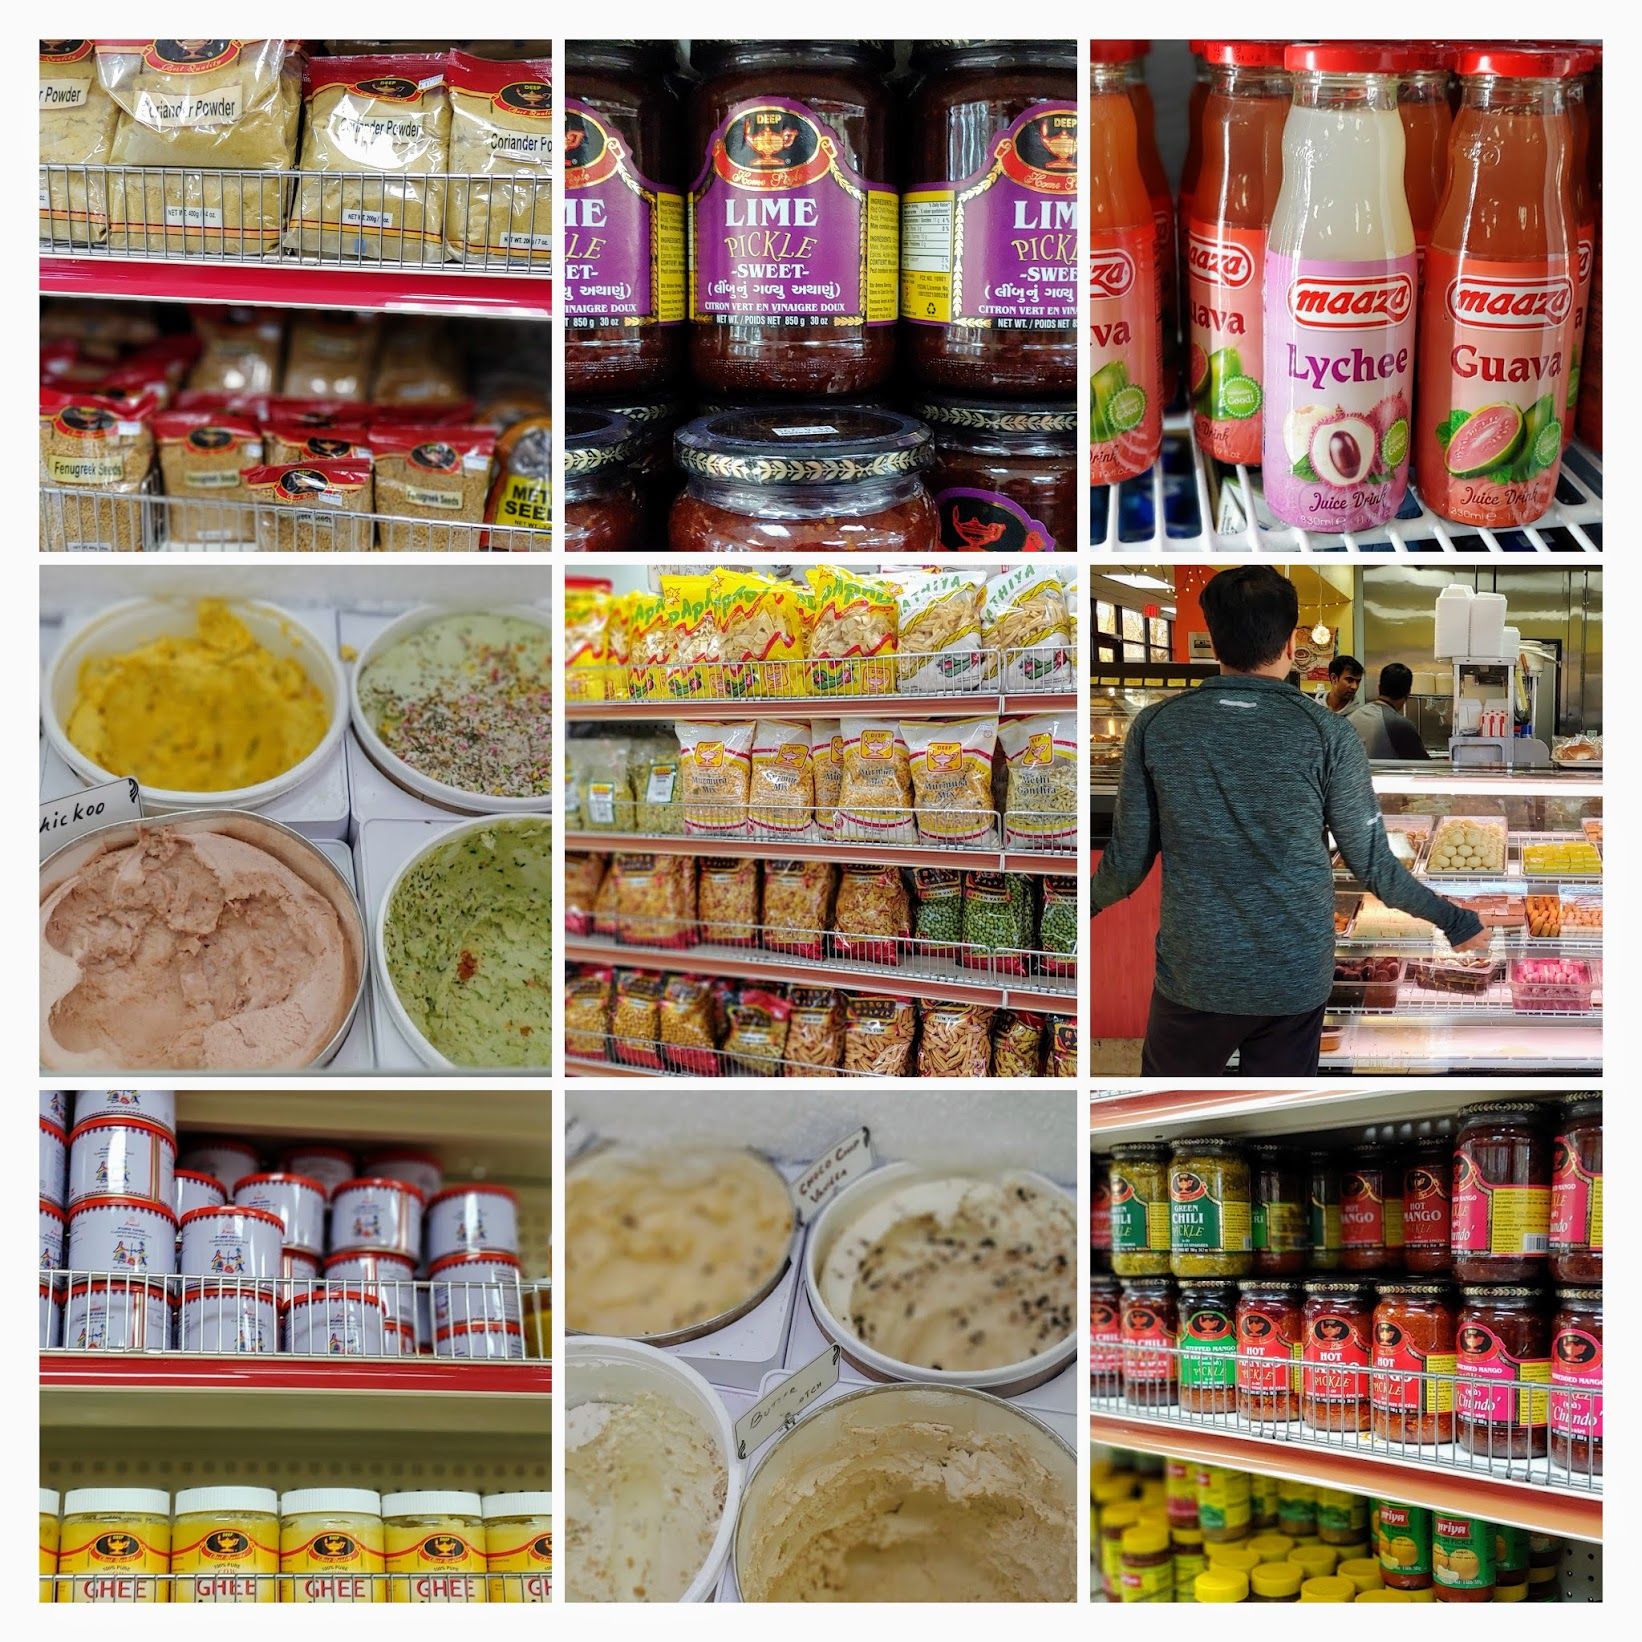 The Local Indian Grocery Store